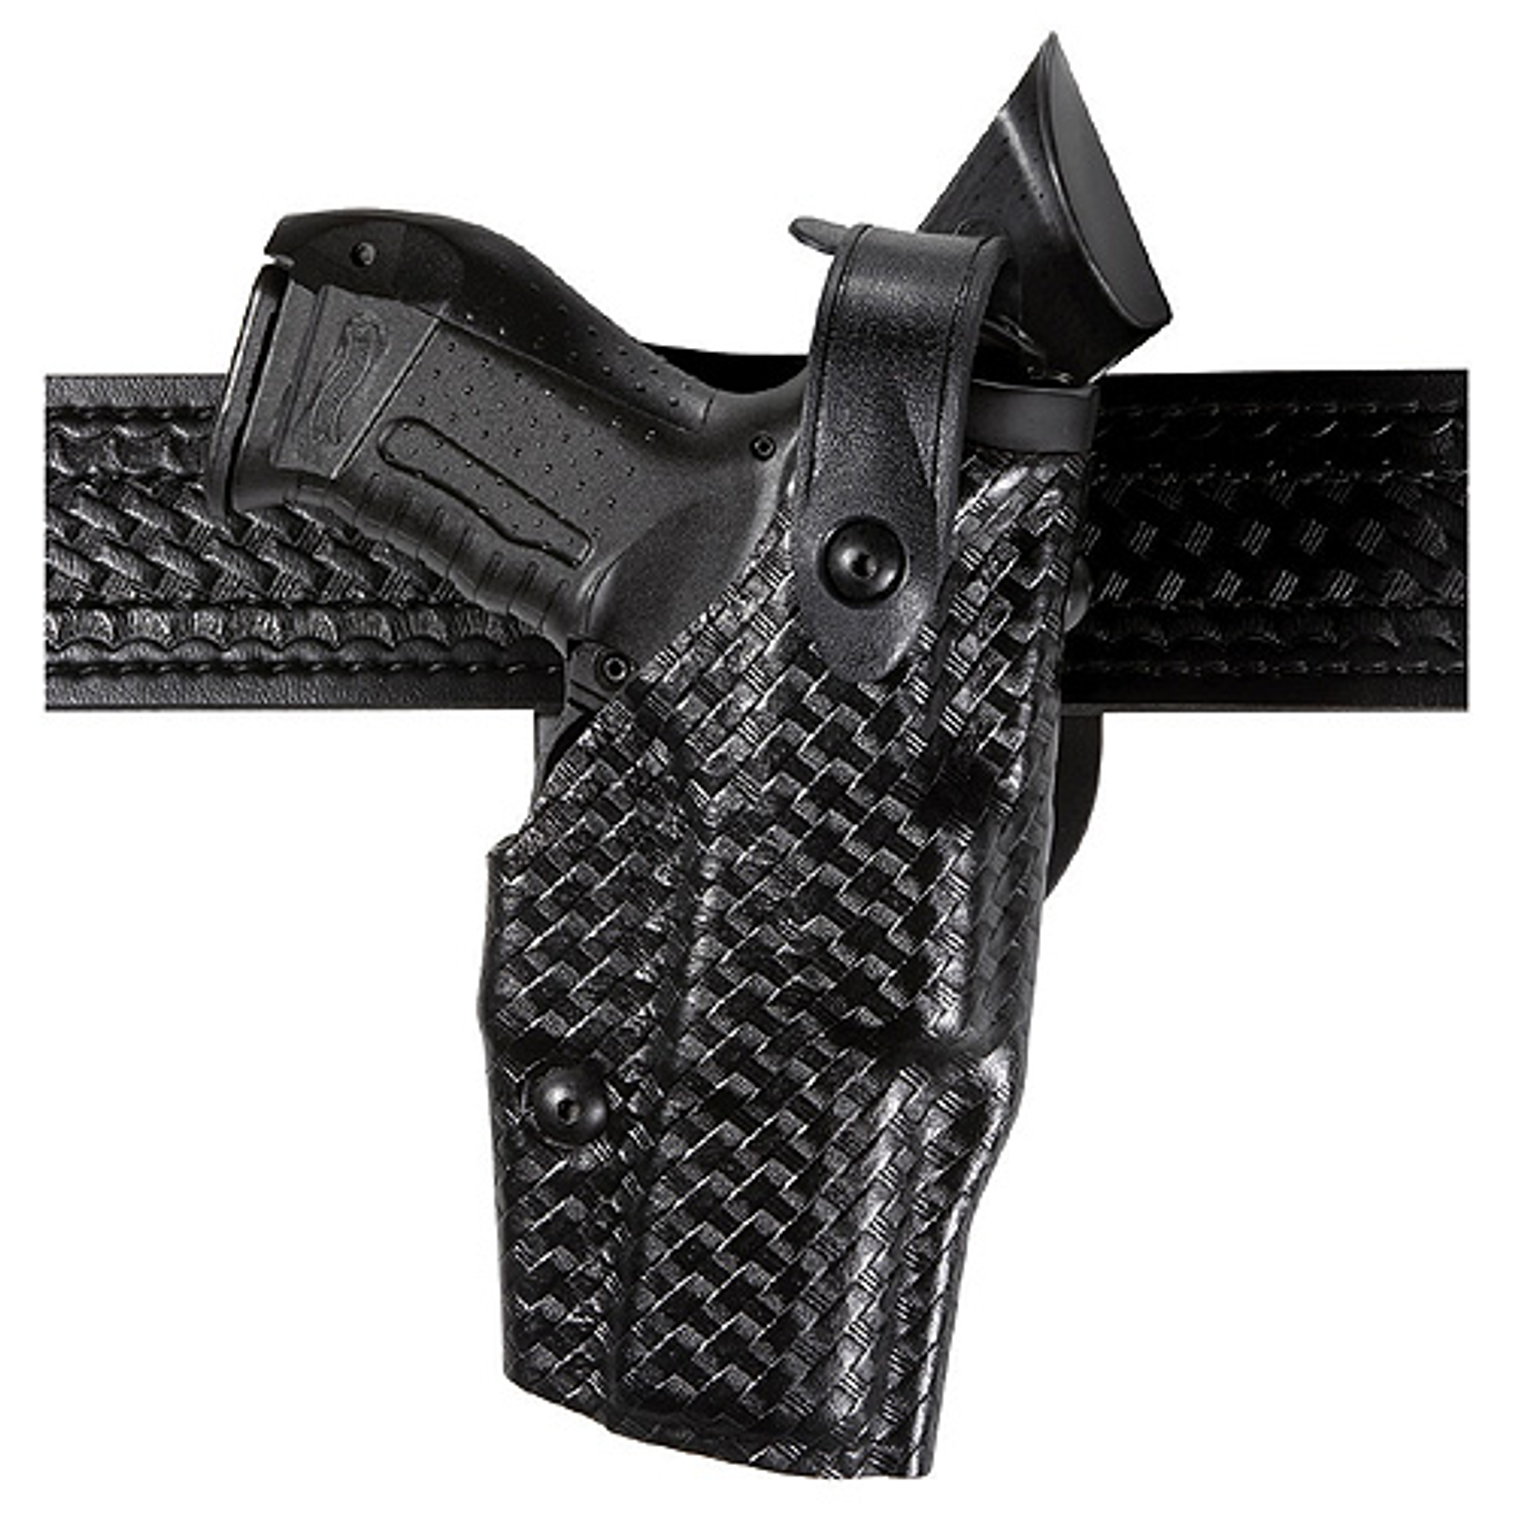 Model 6360 Als/sls Mid-ride, Level Iii Retention Duty Holster For Smith & Wesson M&p 9 W/ Light - KR6360-2192-482